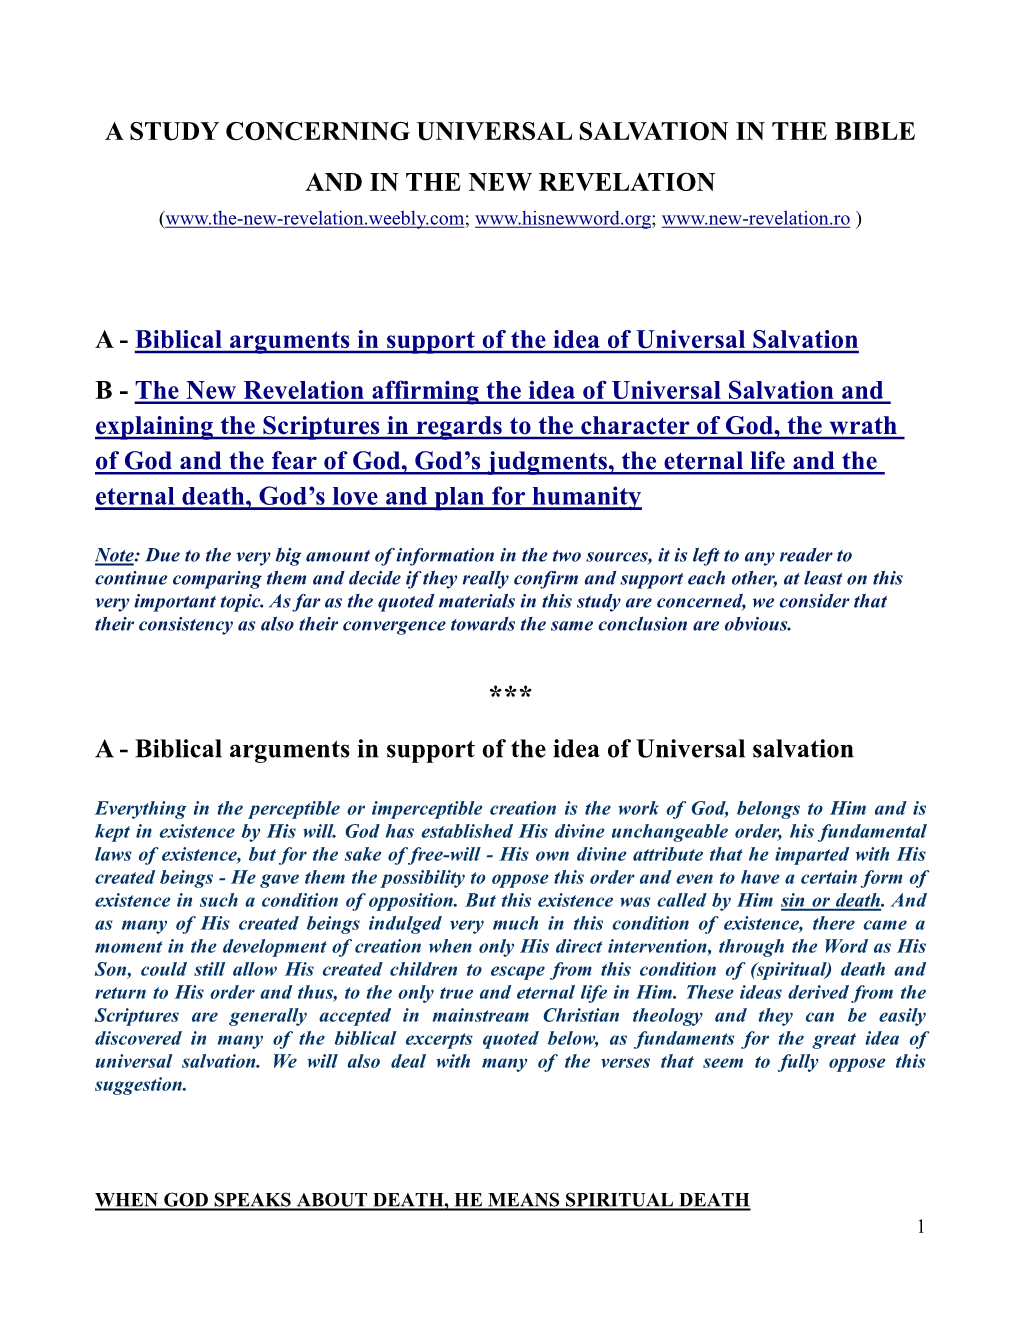 A Study Concerning Universal Salvation in the Bible and in the New Revelation A